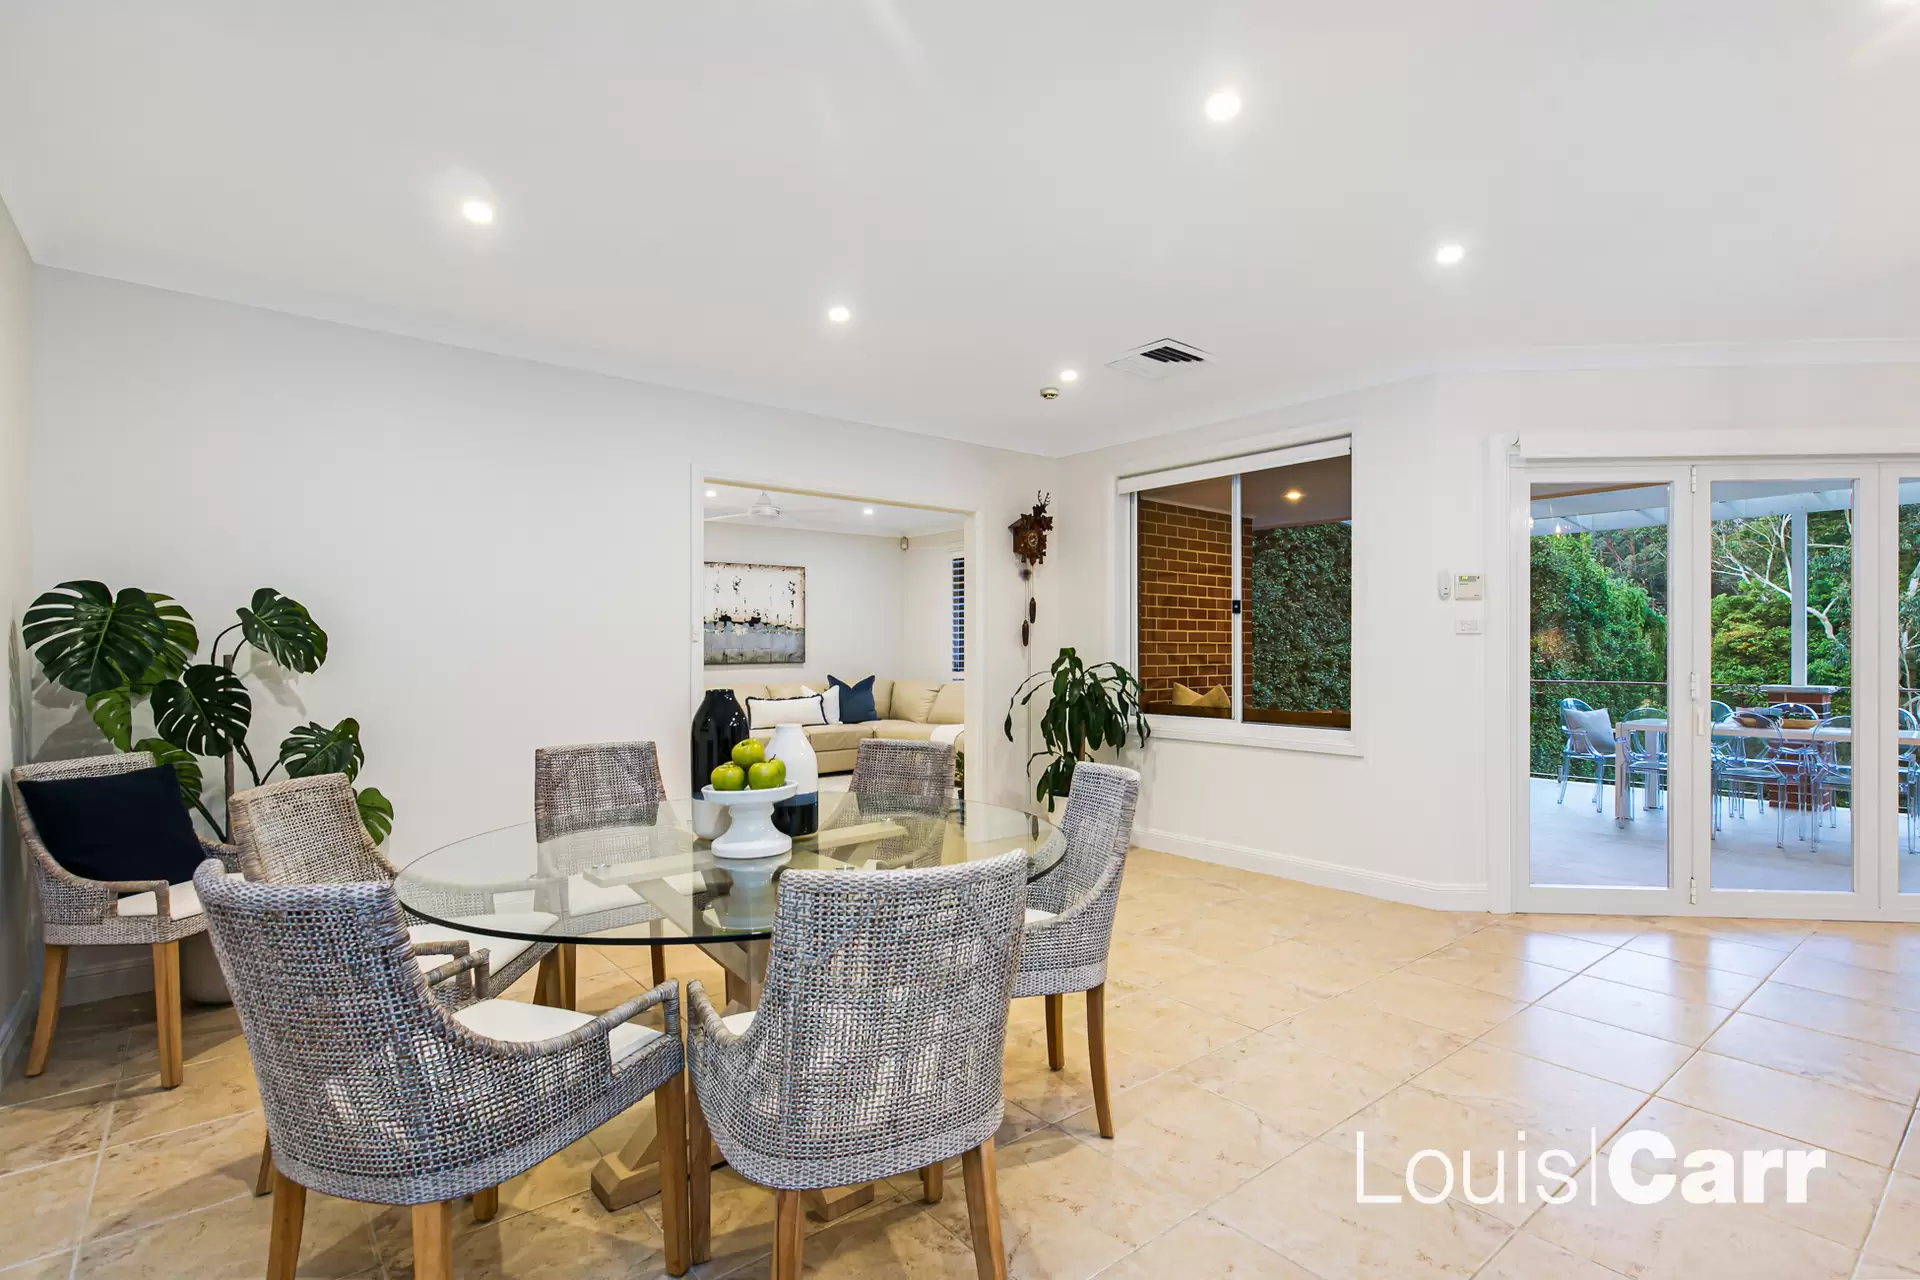 Photo #6: 2 Rodney Place, West Pennant Hills - Sold by Louis Carr Real Estate